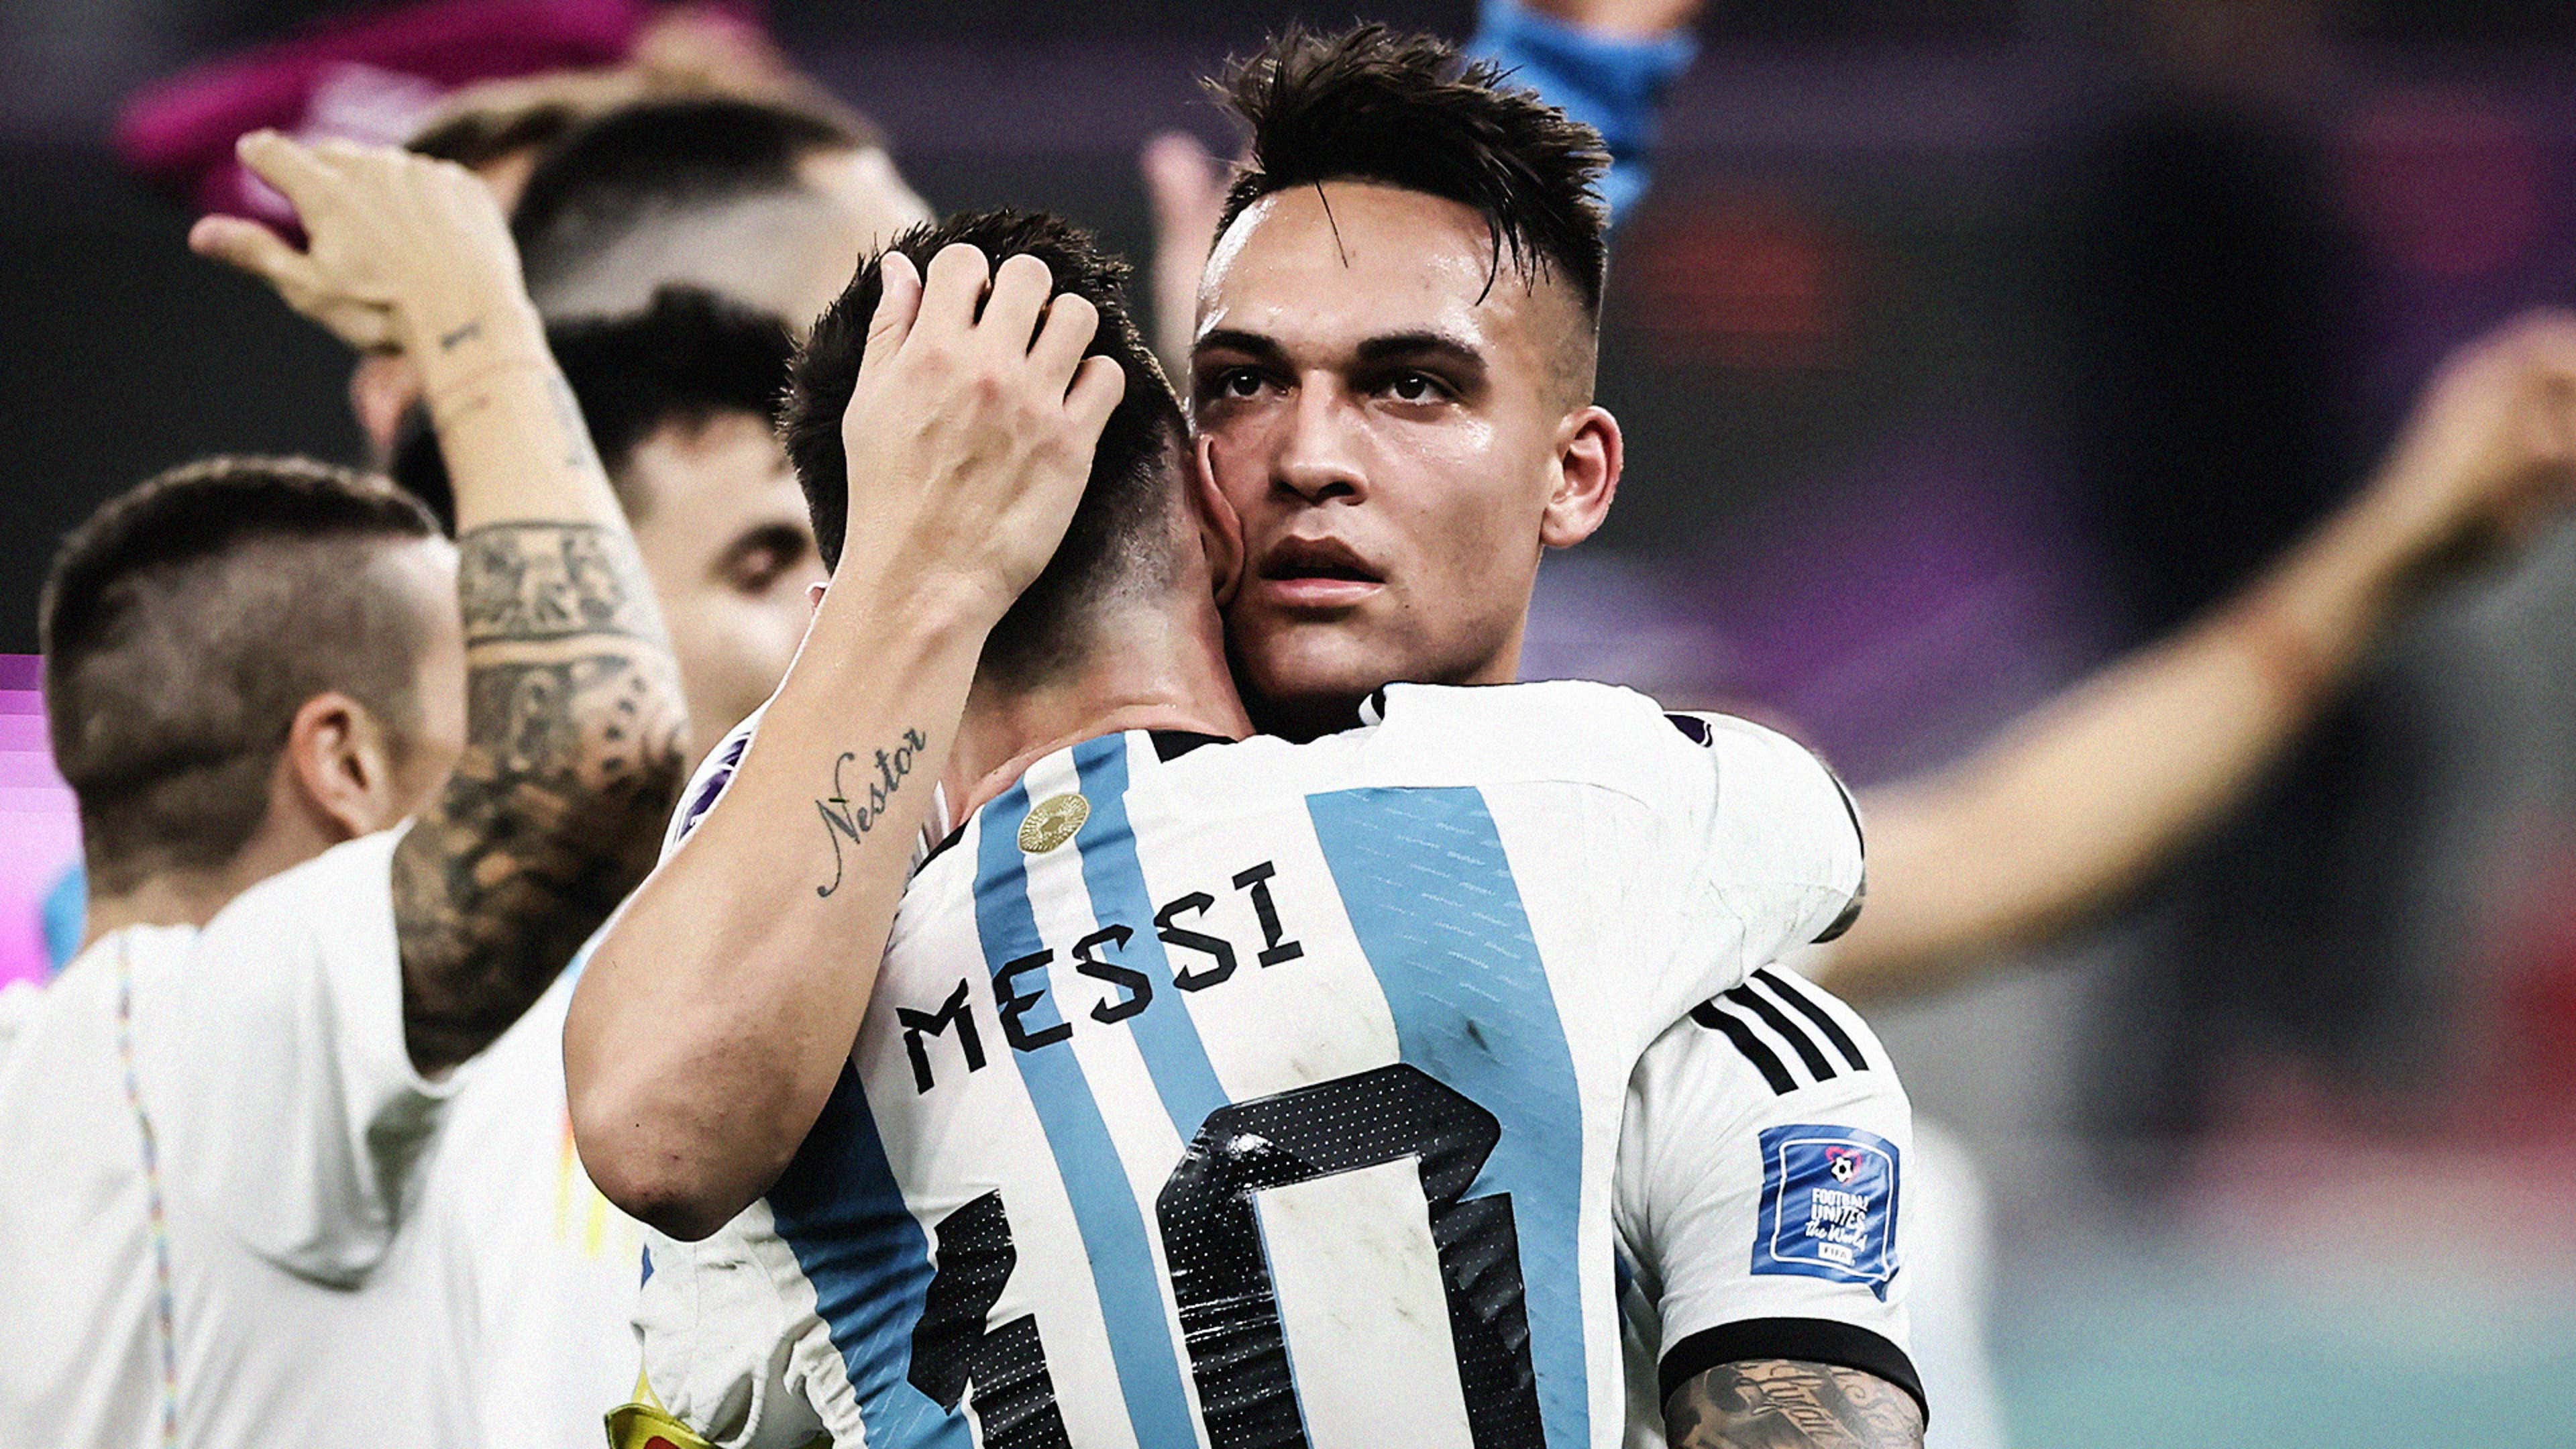 Lautaro Martinez Emerging As One Of The Best Young Strikers - International  Champions Cup